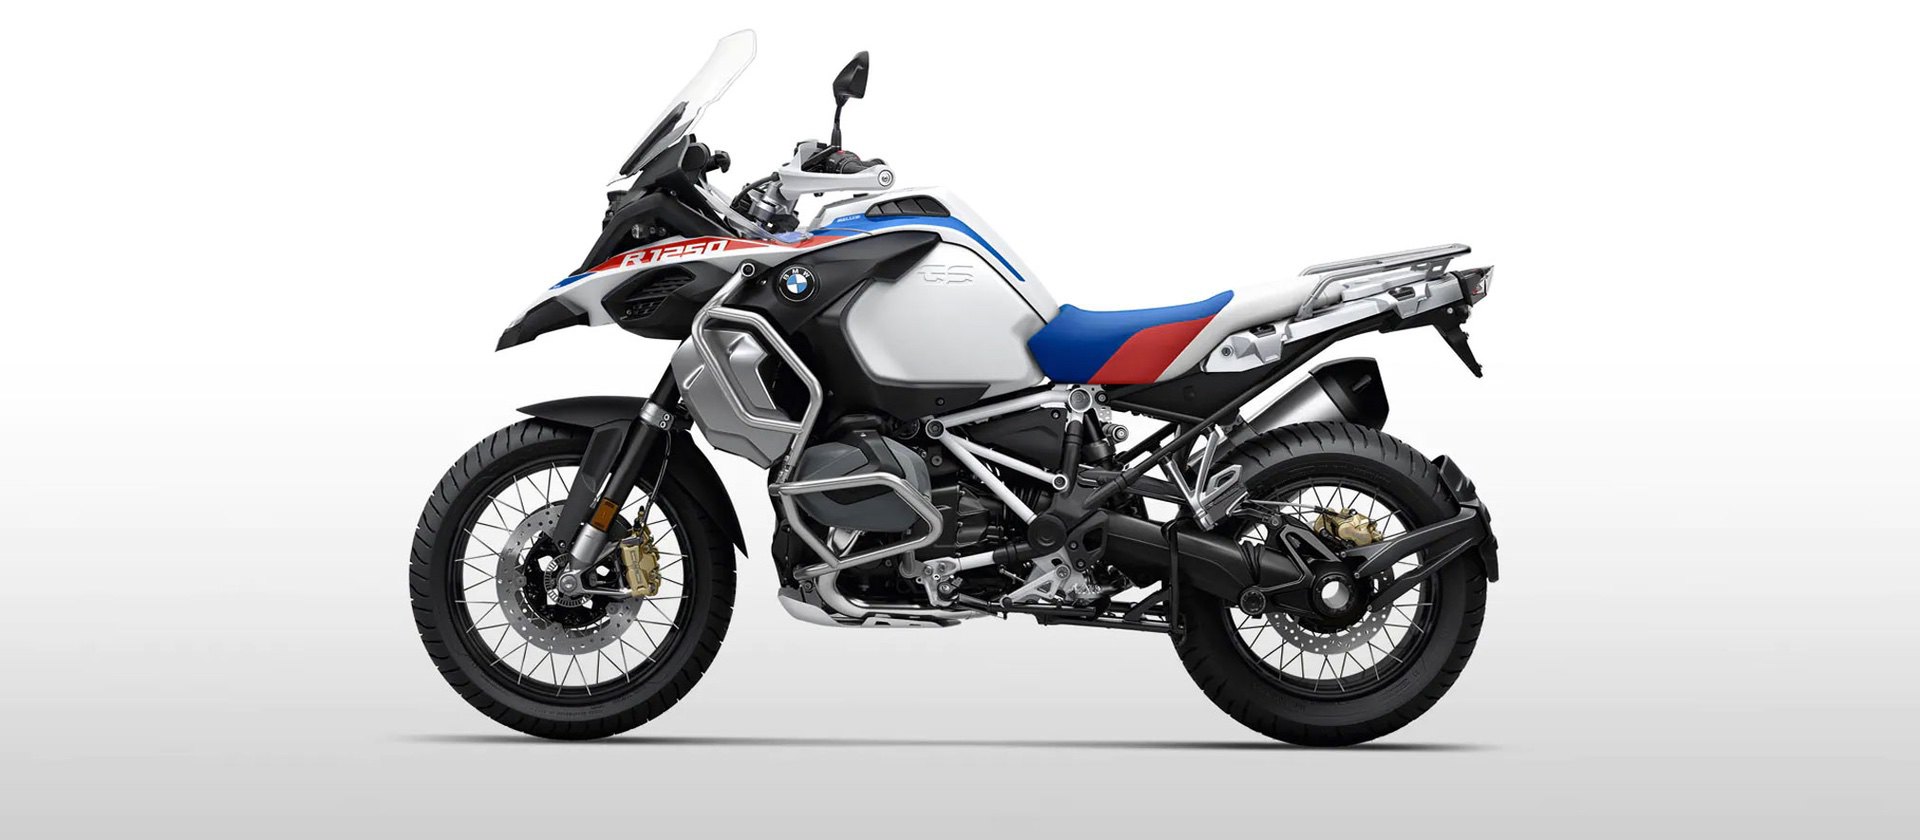 The 2022 BMW R1250GS